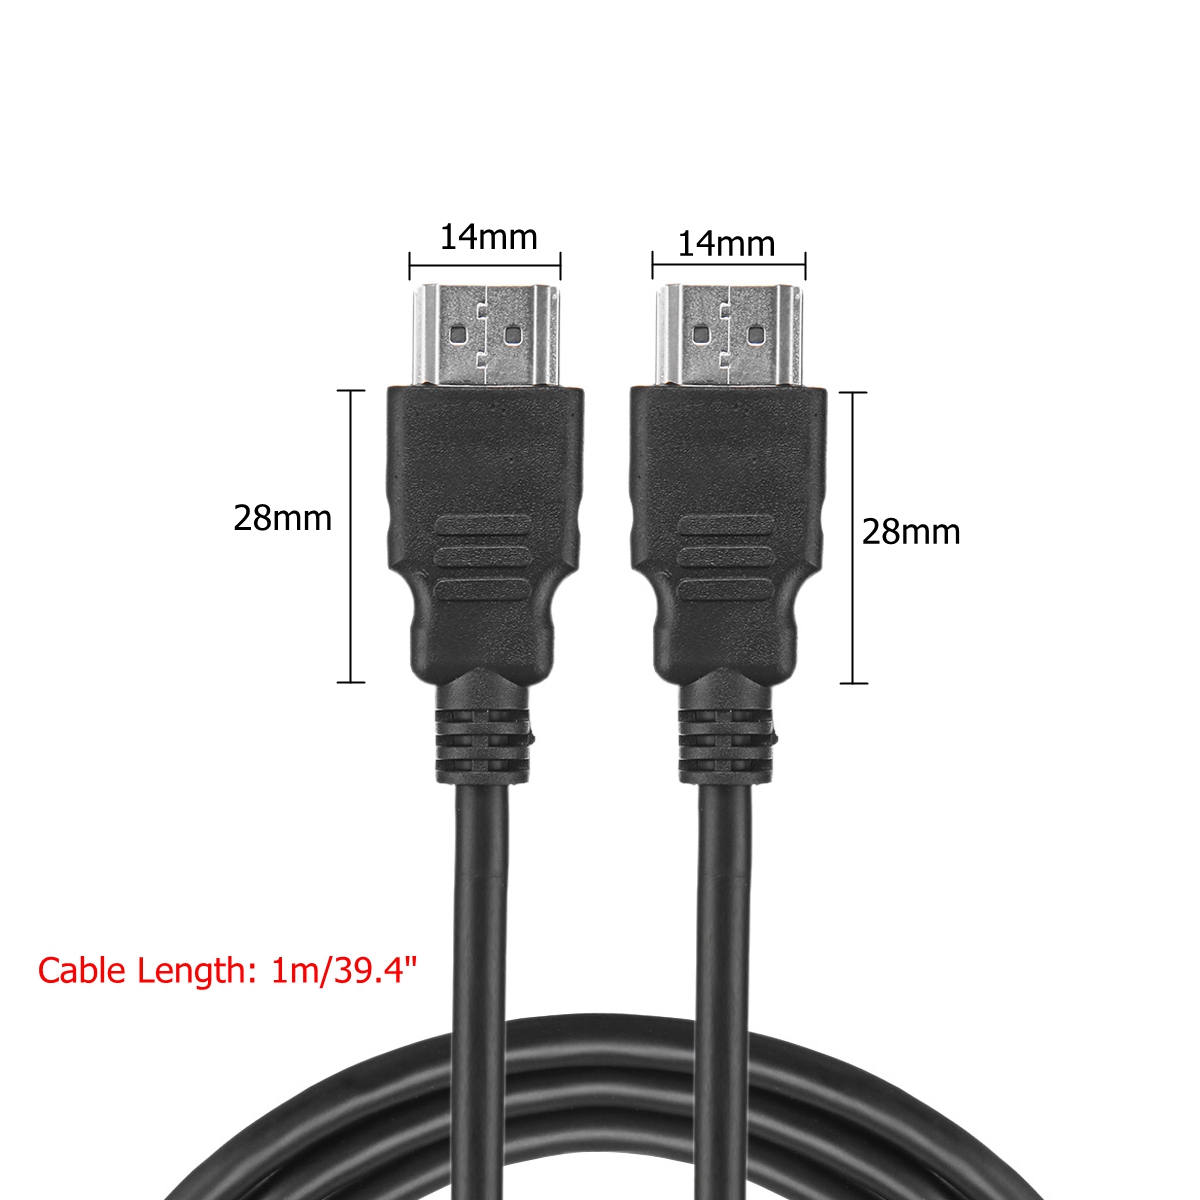 1M-High-Definition-Multimedia-14mm-Audio-Cable-for-Video-Game-Console-HD-TV-DVD-Players-DVR-1440470-9